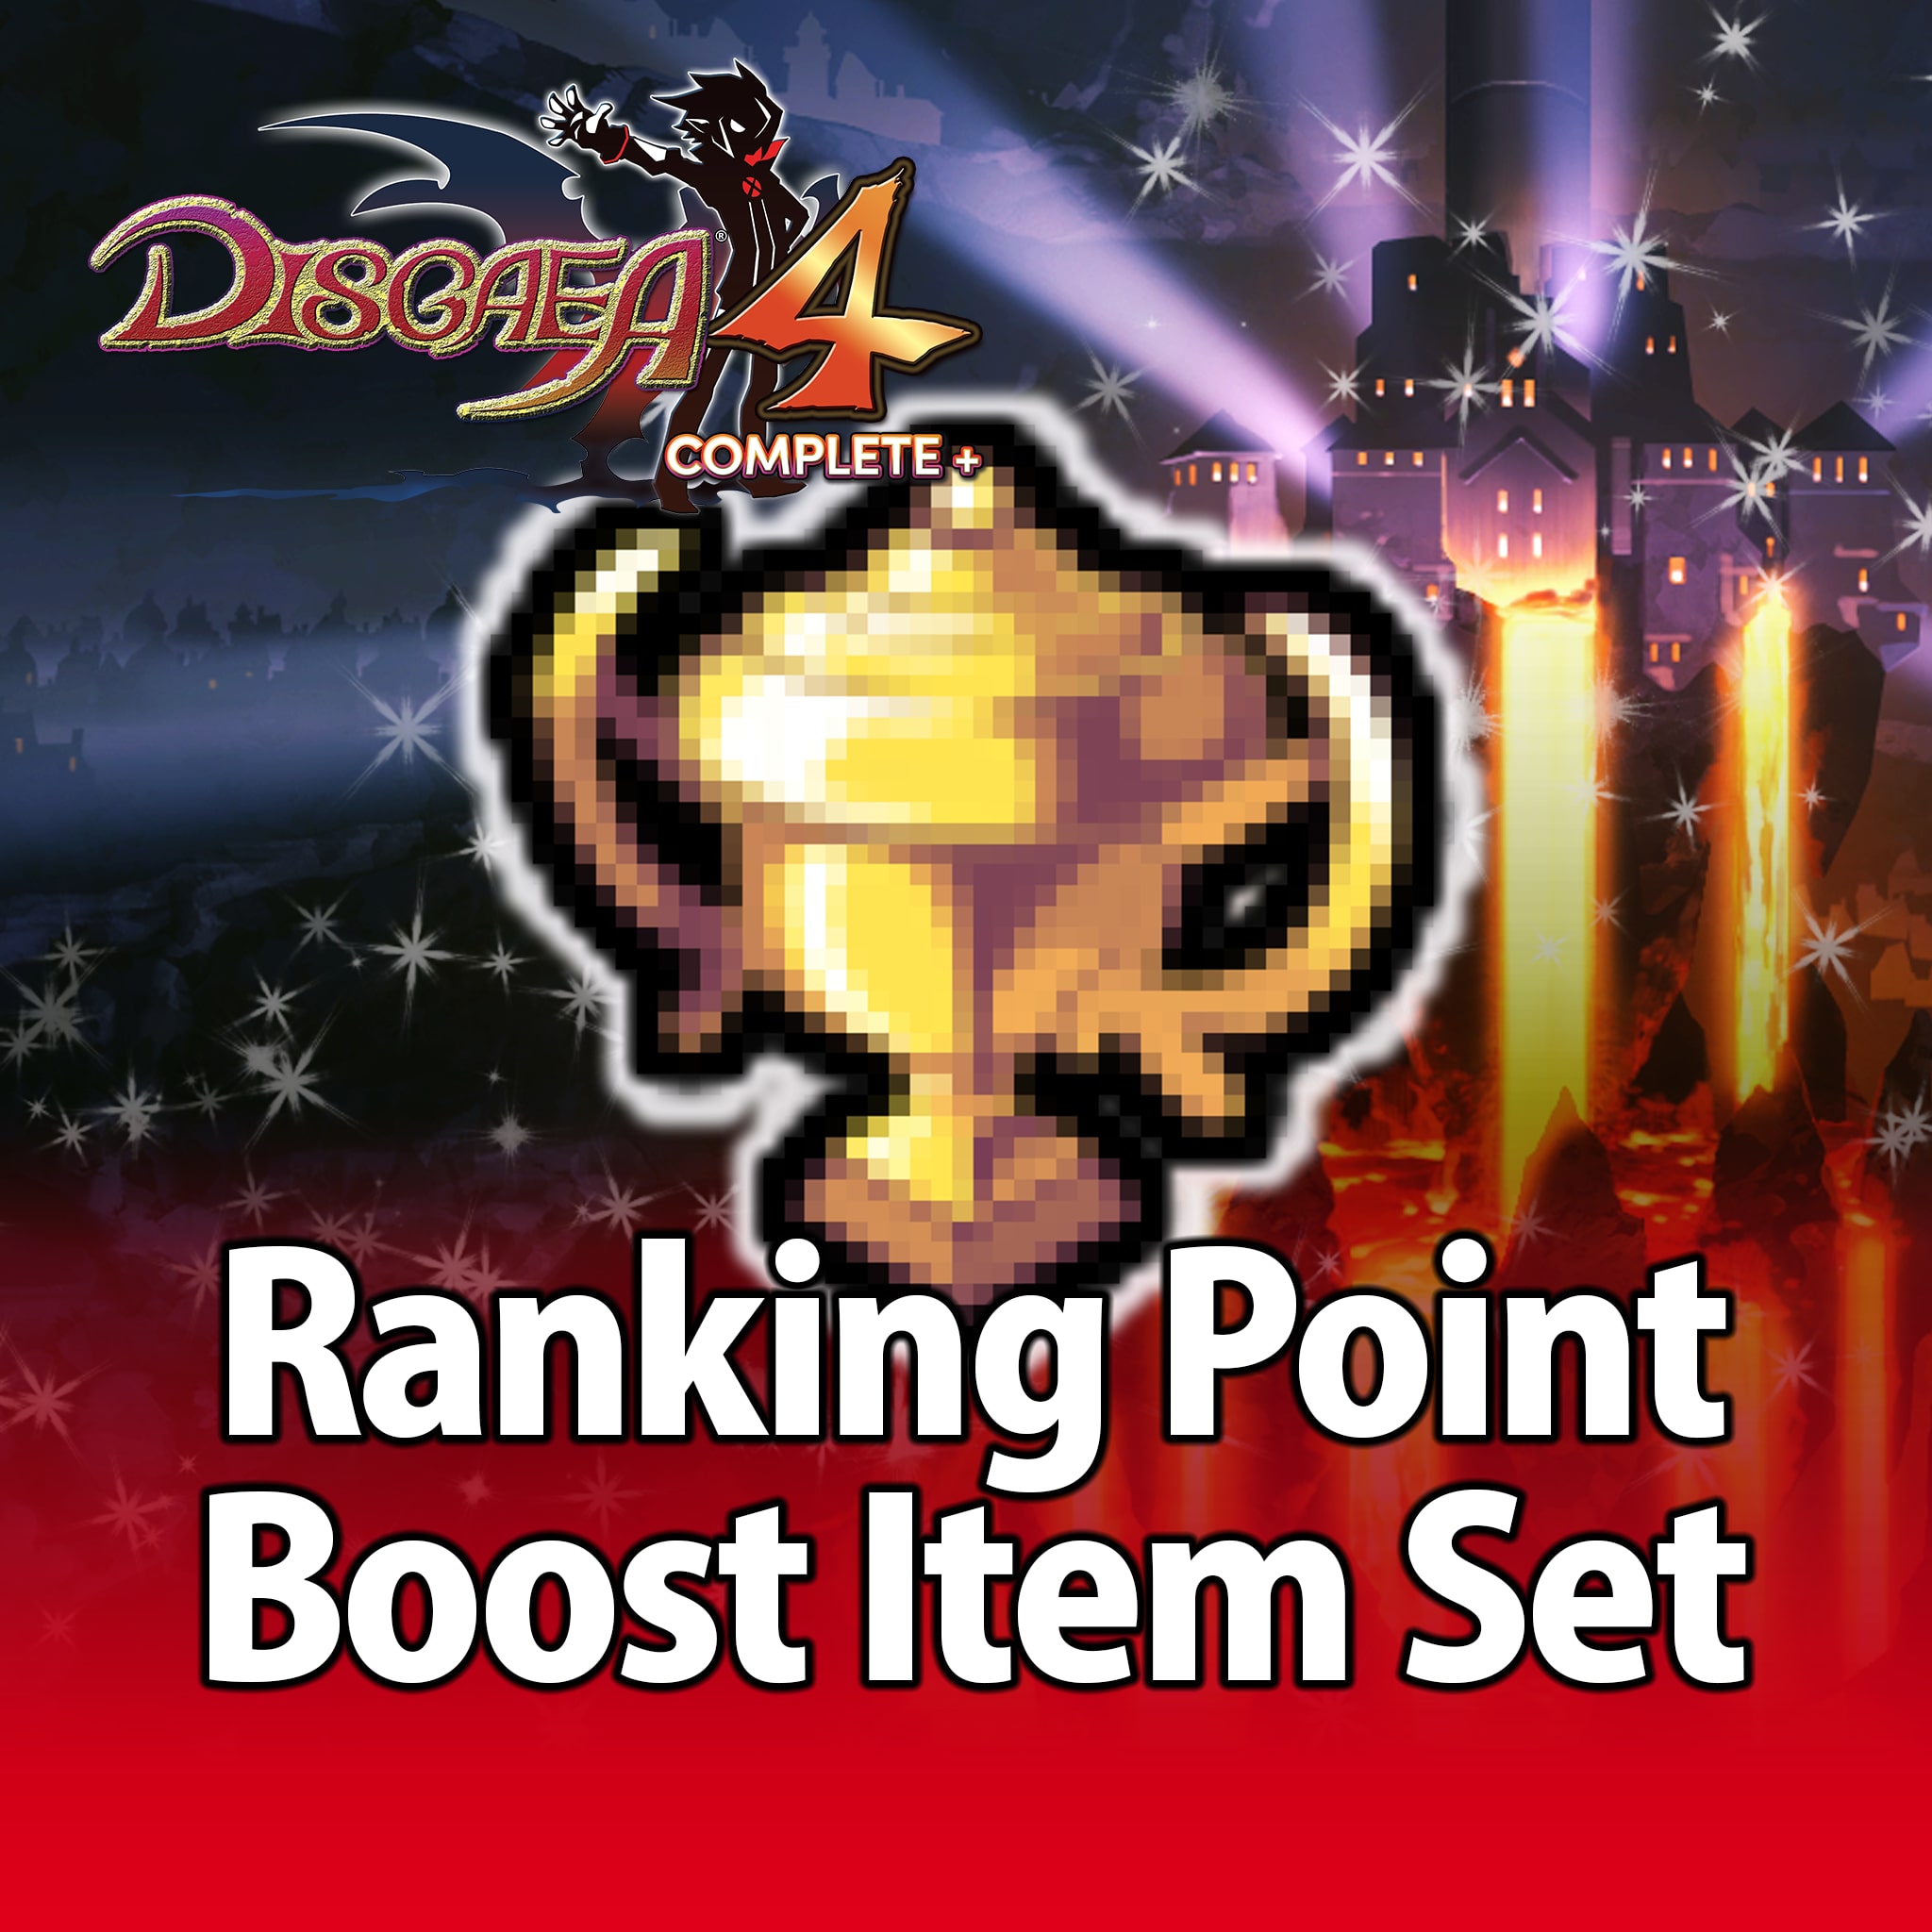 Disgaea 4 Complete+ Ranking Point Boost Item Set